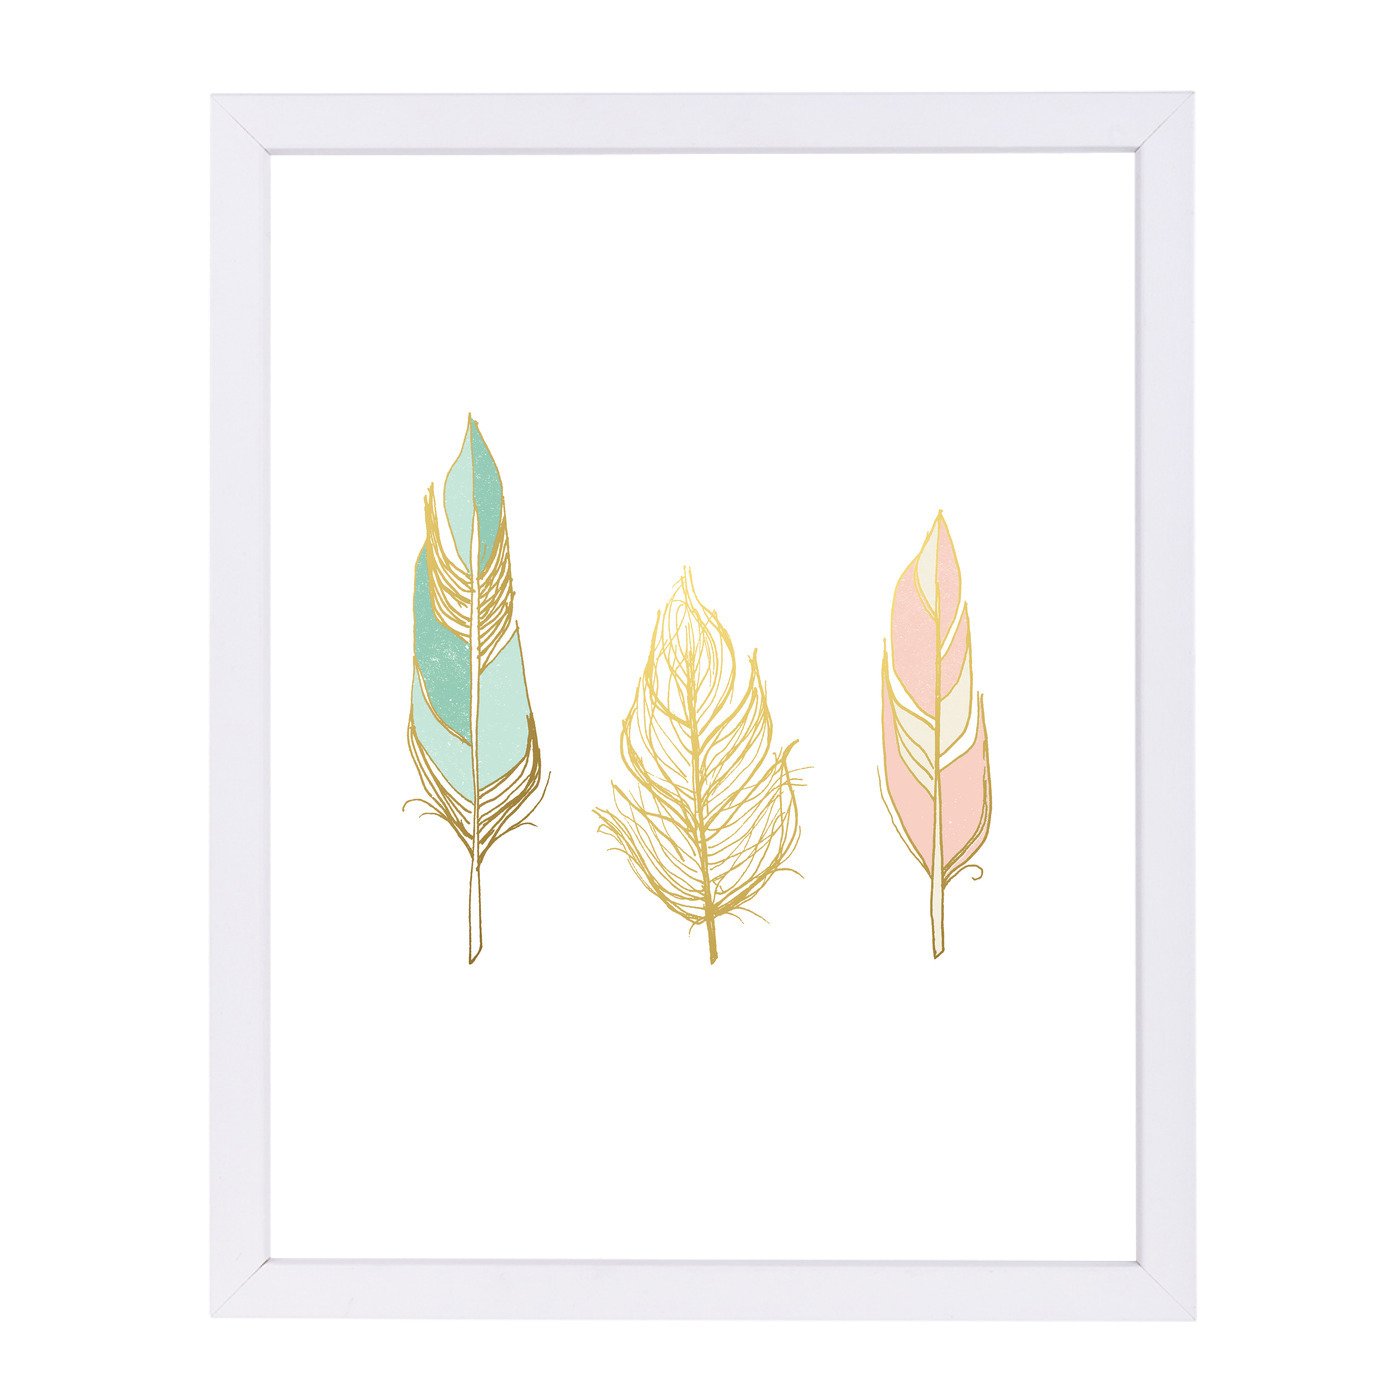 Three Feathers In Gold By Wall + Wonder - Framed Print - Americanflat